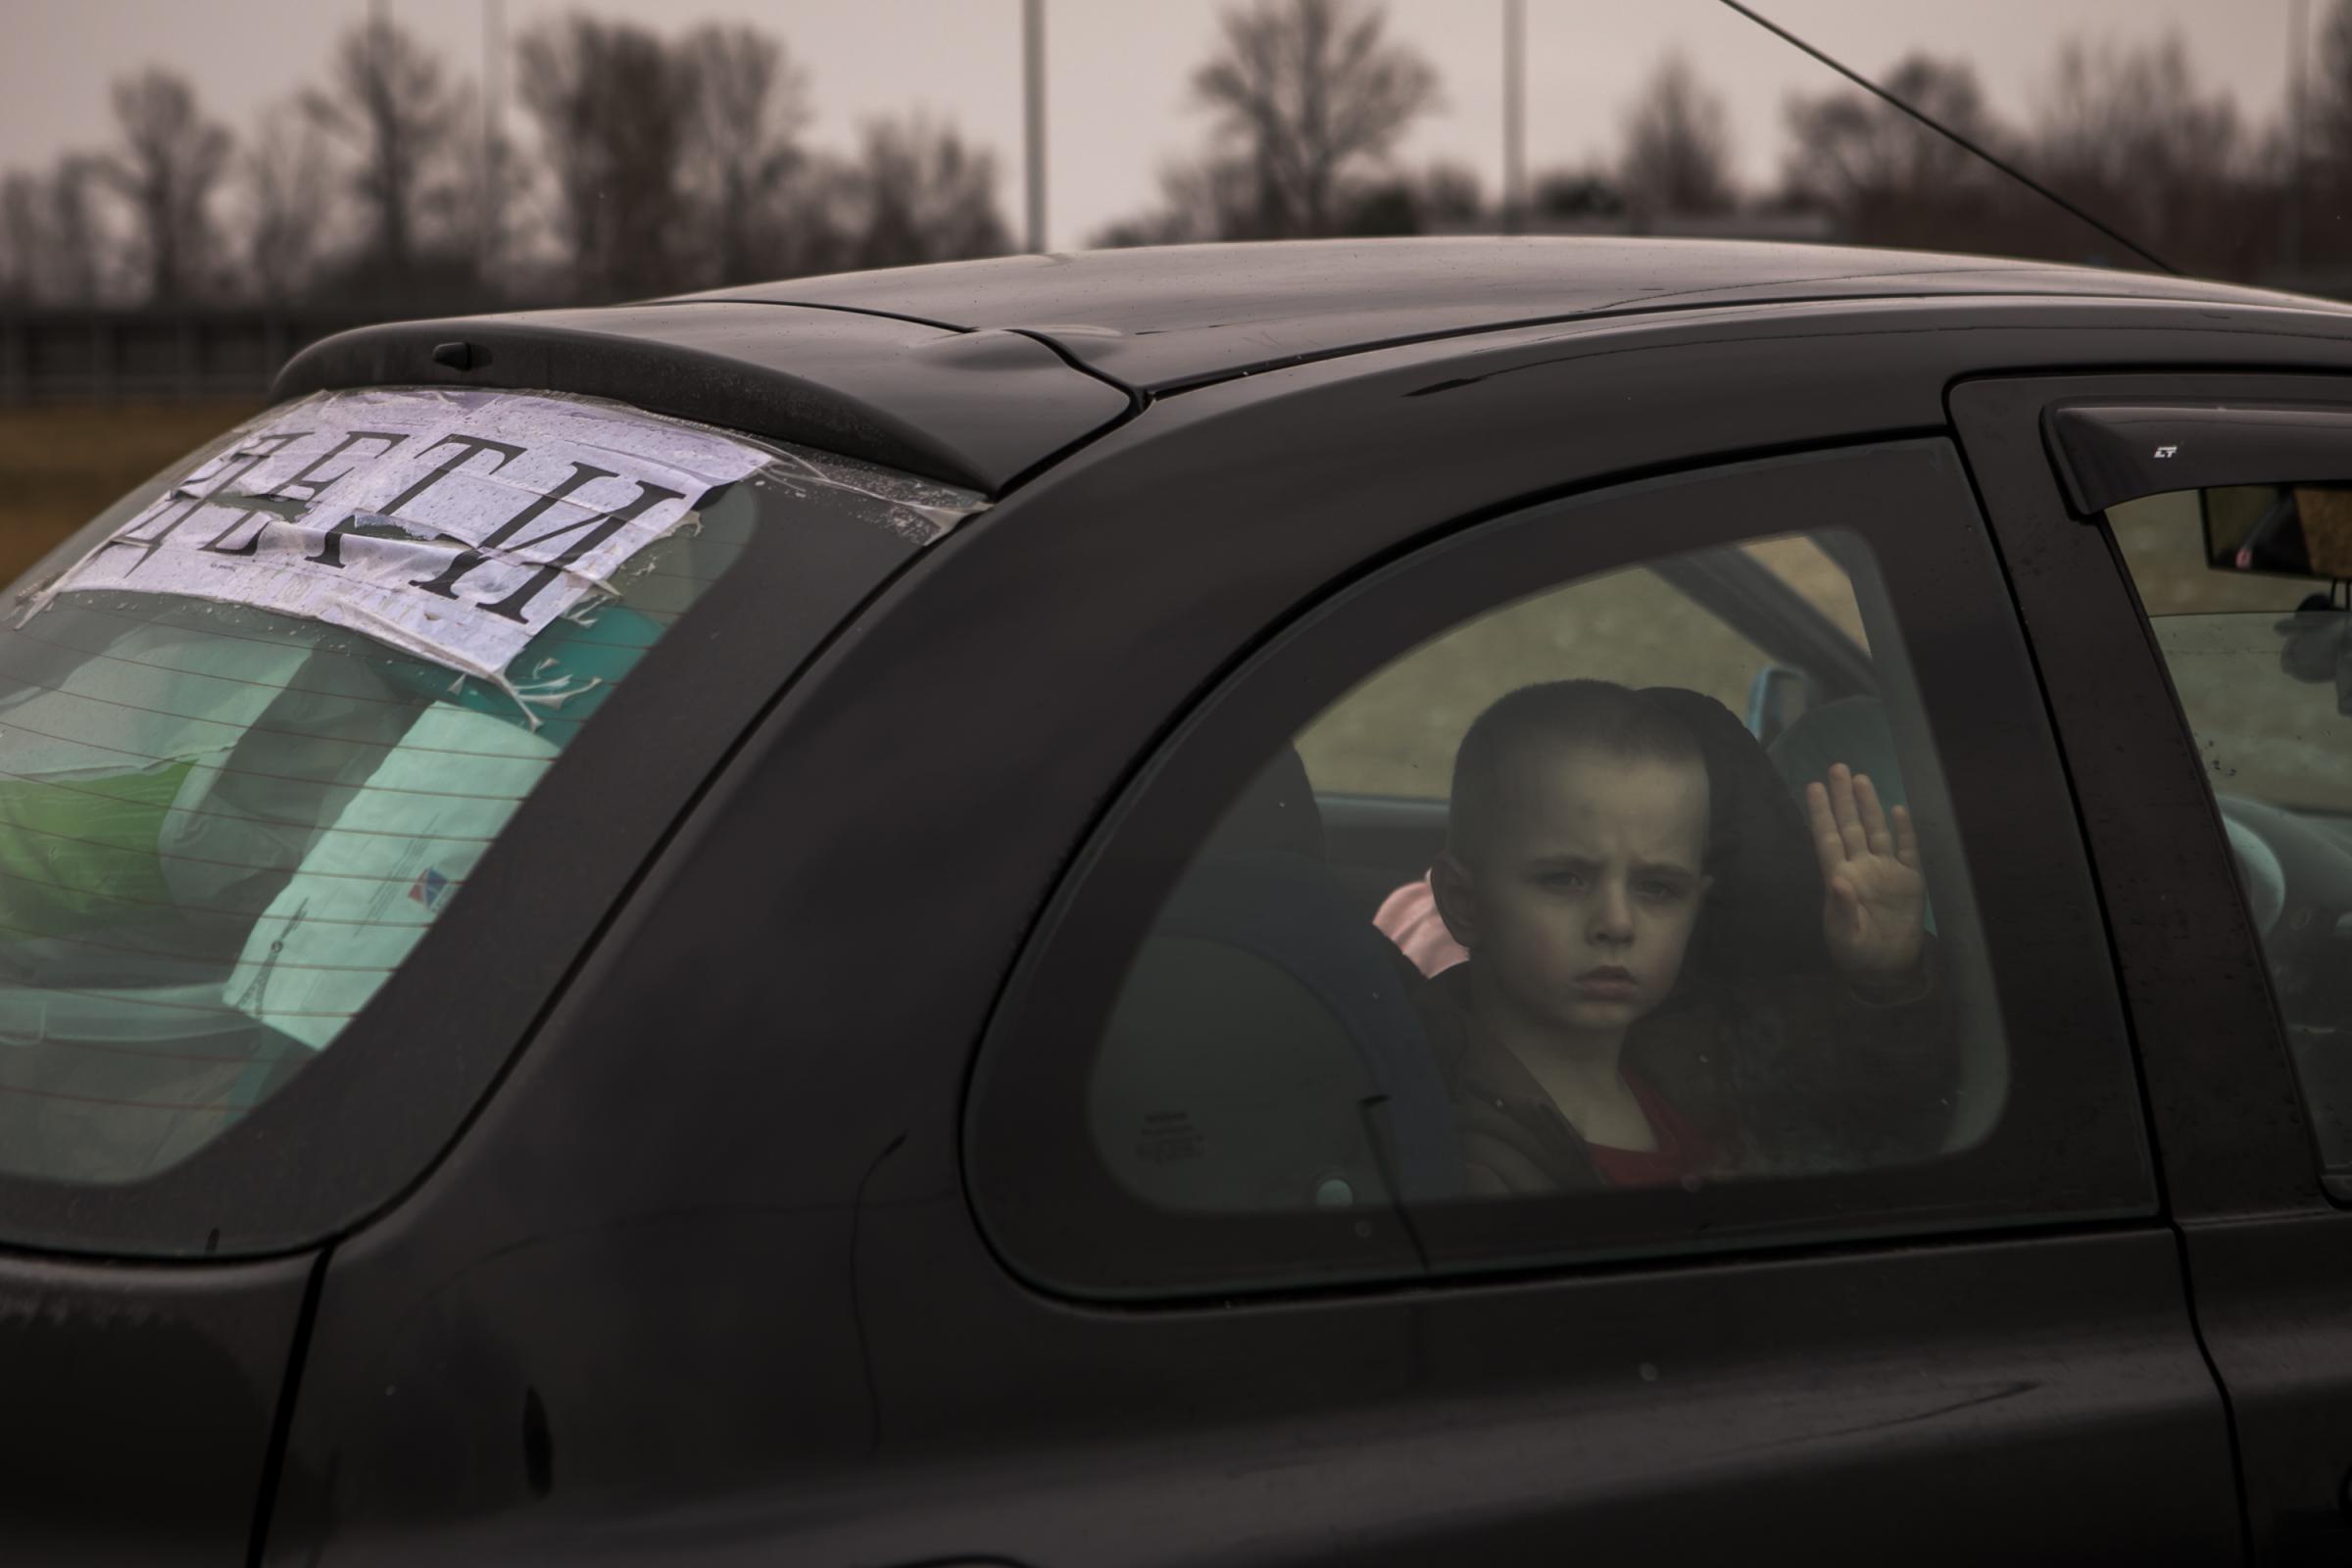  A sign that says &ldquo;children&rdquo; in Ukrainian on the back of a car driven by Tanya Salo. She left the family&rsquo;s home in Kharkiv, Ukraine and drove for five days to the Polish border with her husband, three children &ndash; Fedir, 4 ( in the picture ), Mykhailo, 8, Kamila, 12 - and pet dog, Ozipa, and cat, Sarah. She had to say goodbye to her husband at the border and carry on to Gdańsk, Poland. 9.03.2022 Rest stop Budy Łańcuckie, Poland. ( On assignment for The Globe and Mail ) 